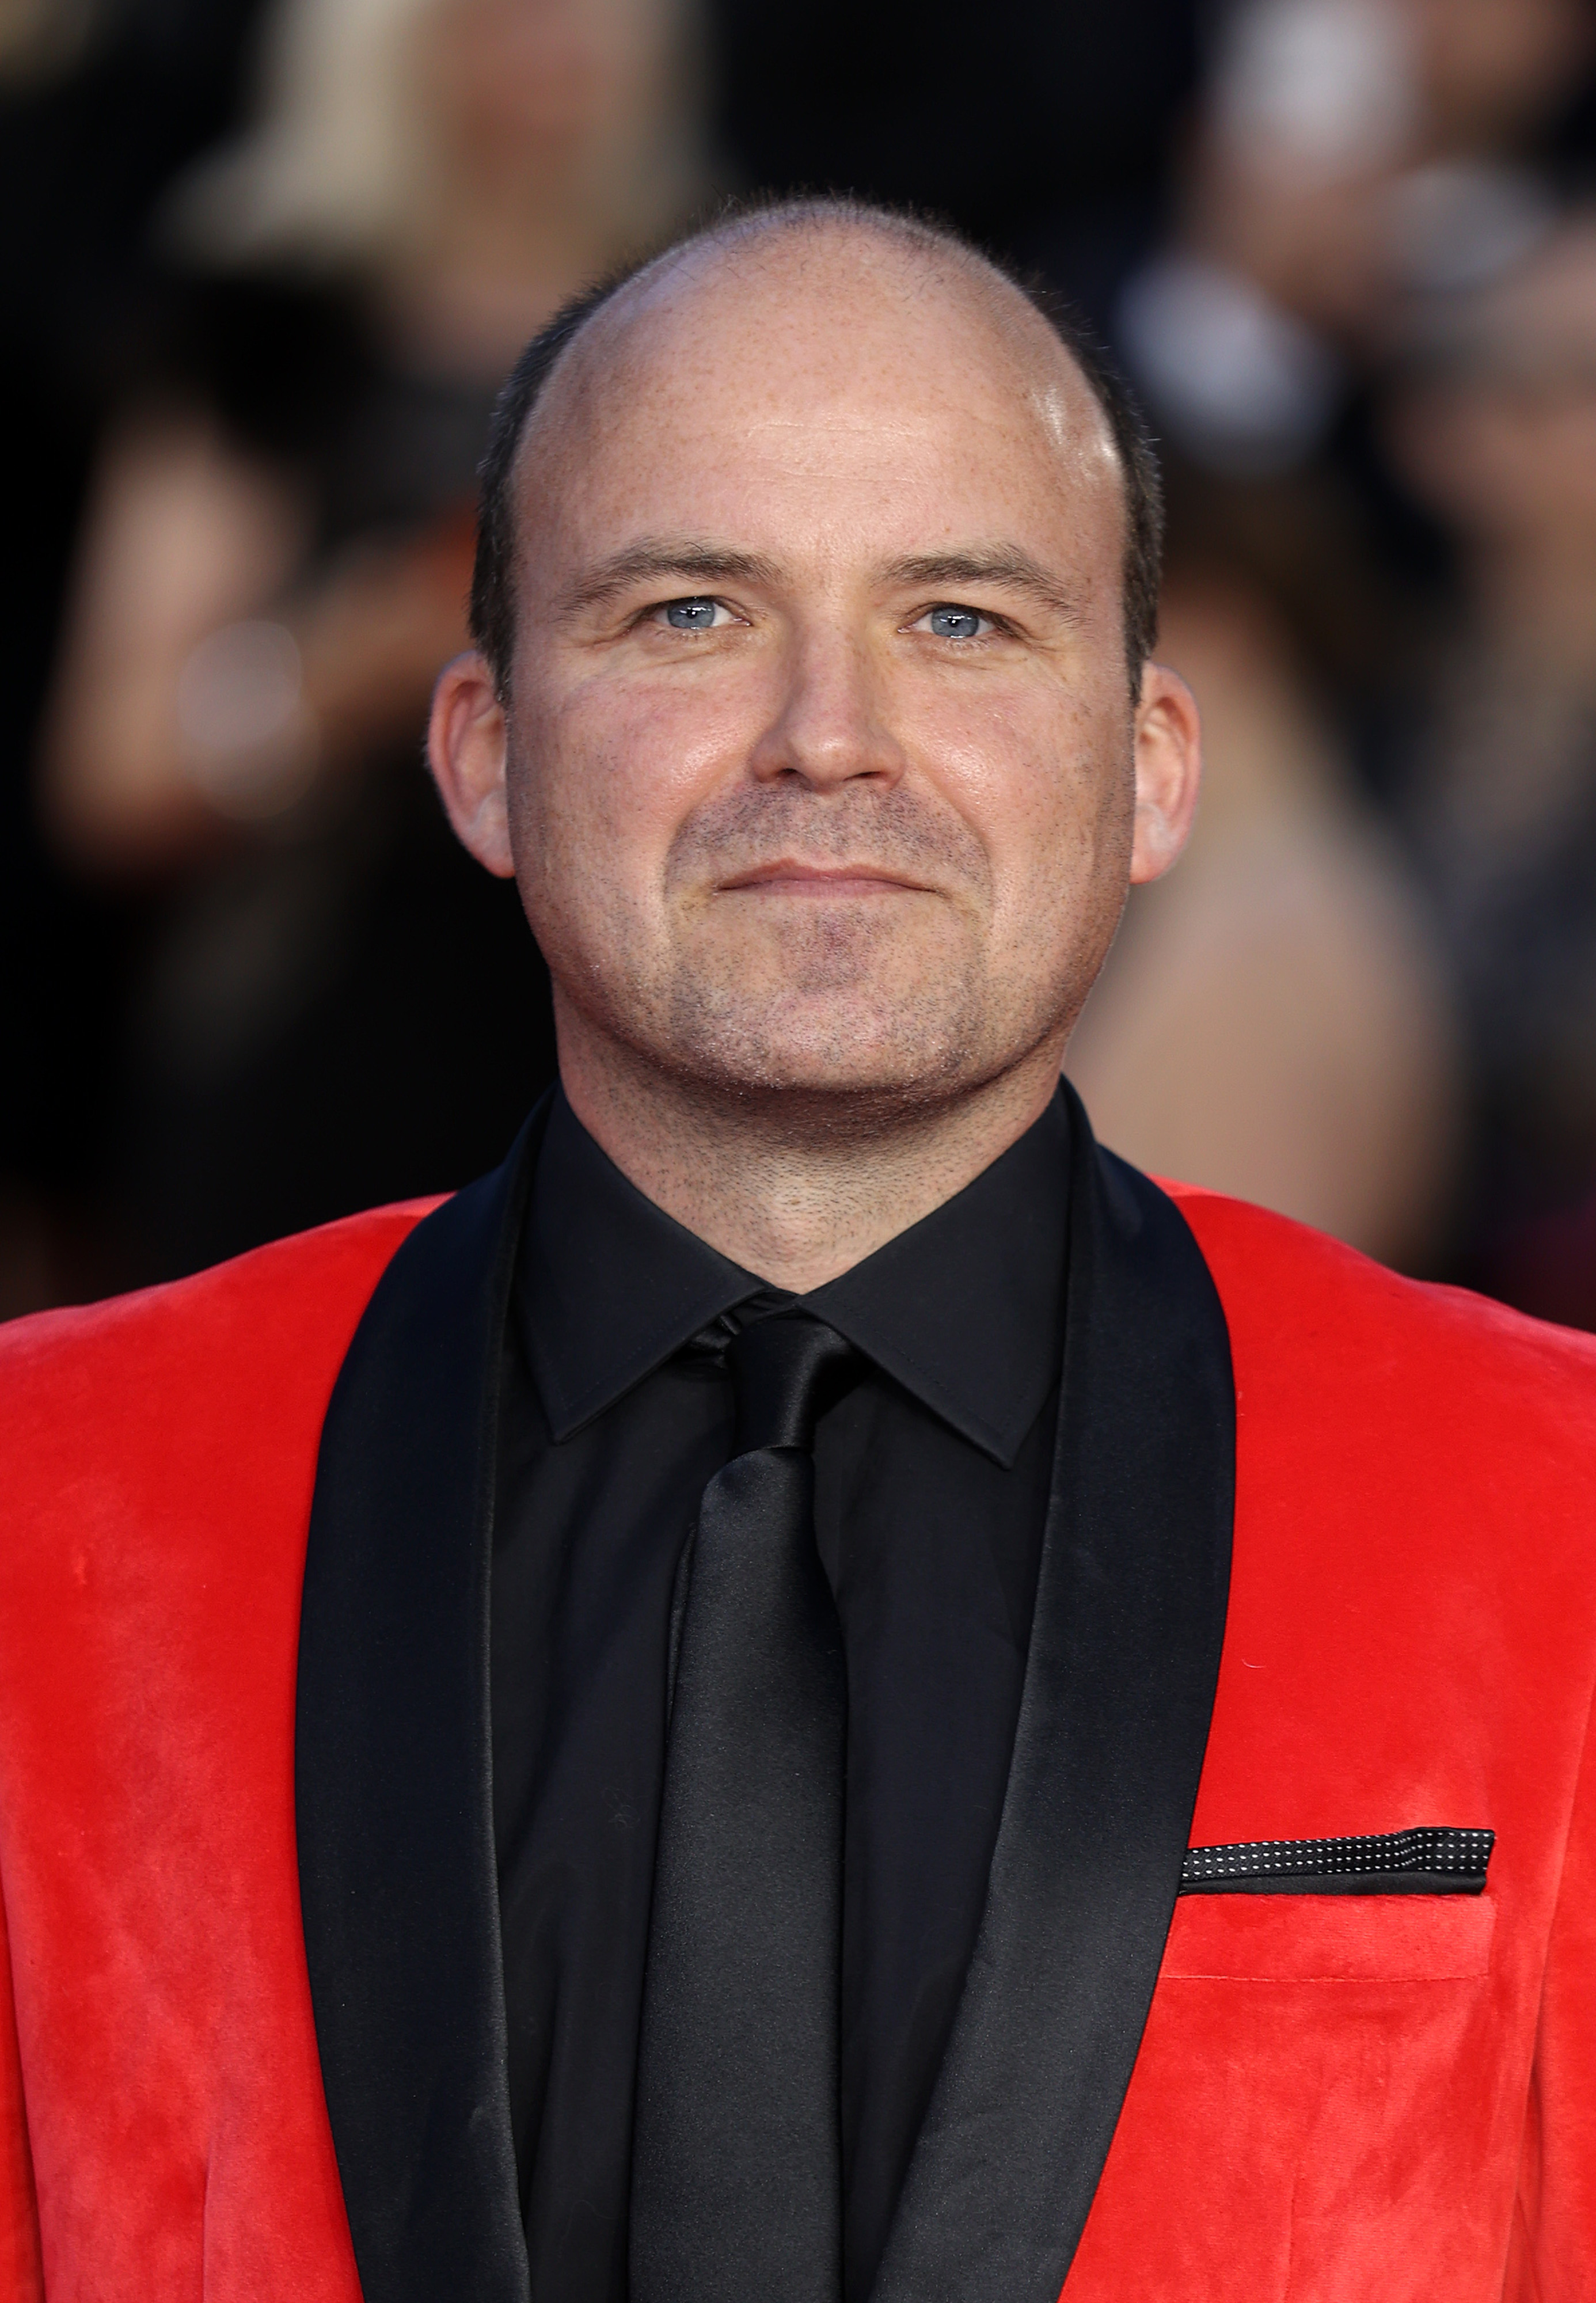 Actor Rory Kinnear attends the "No Time To Die" World Premiere at Royal Albert Hall on September 28, 2021 in London, England | Source: Getty Images